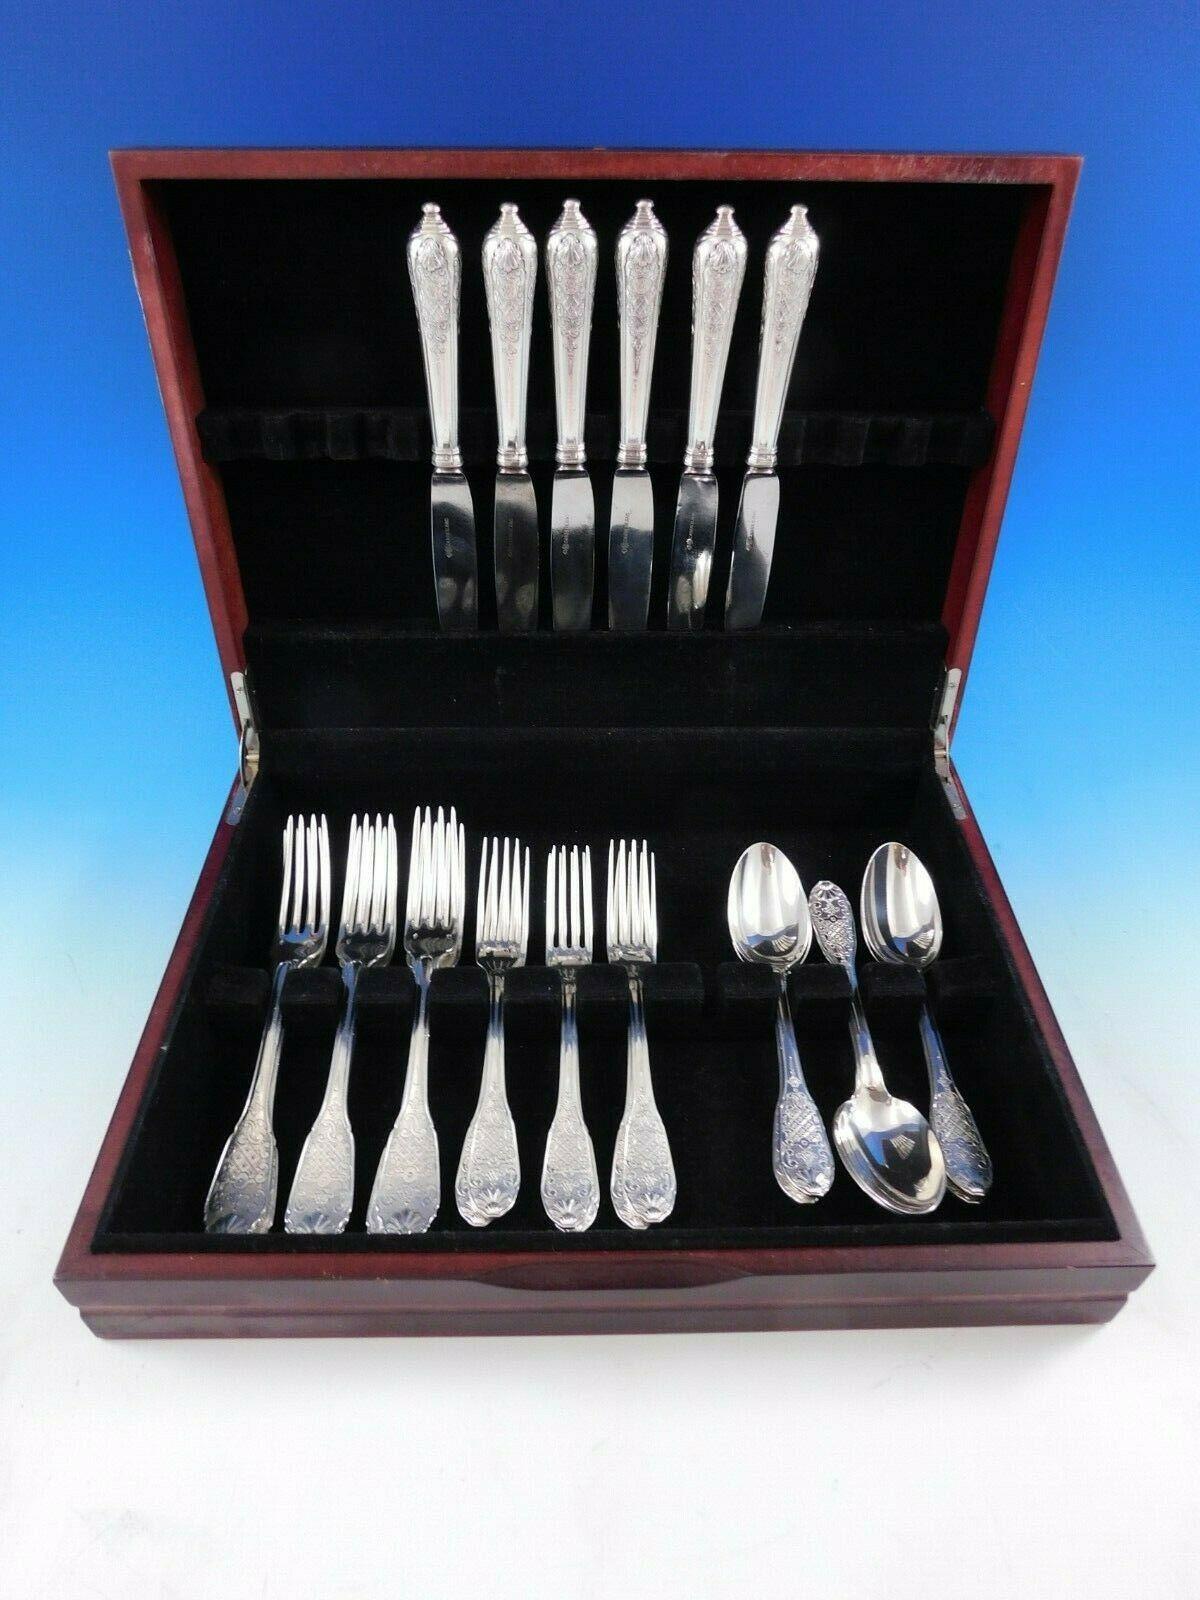 Dinner size royal Cisele by Christofle or Cardeilhac sterling silver flatware set, 24 pieces. This set includes:

6 large dinner knives, cannon style handles, 10